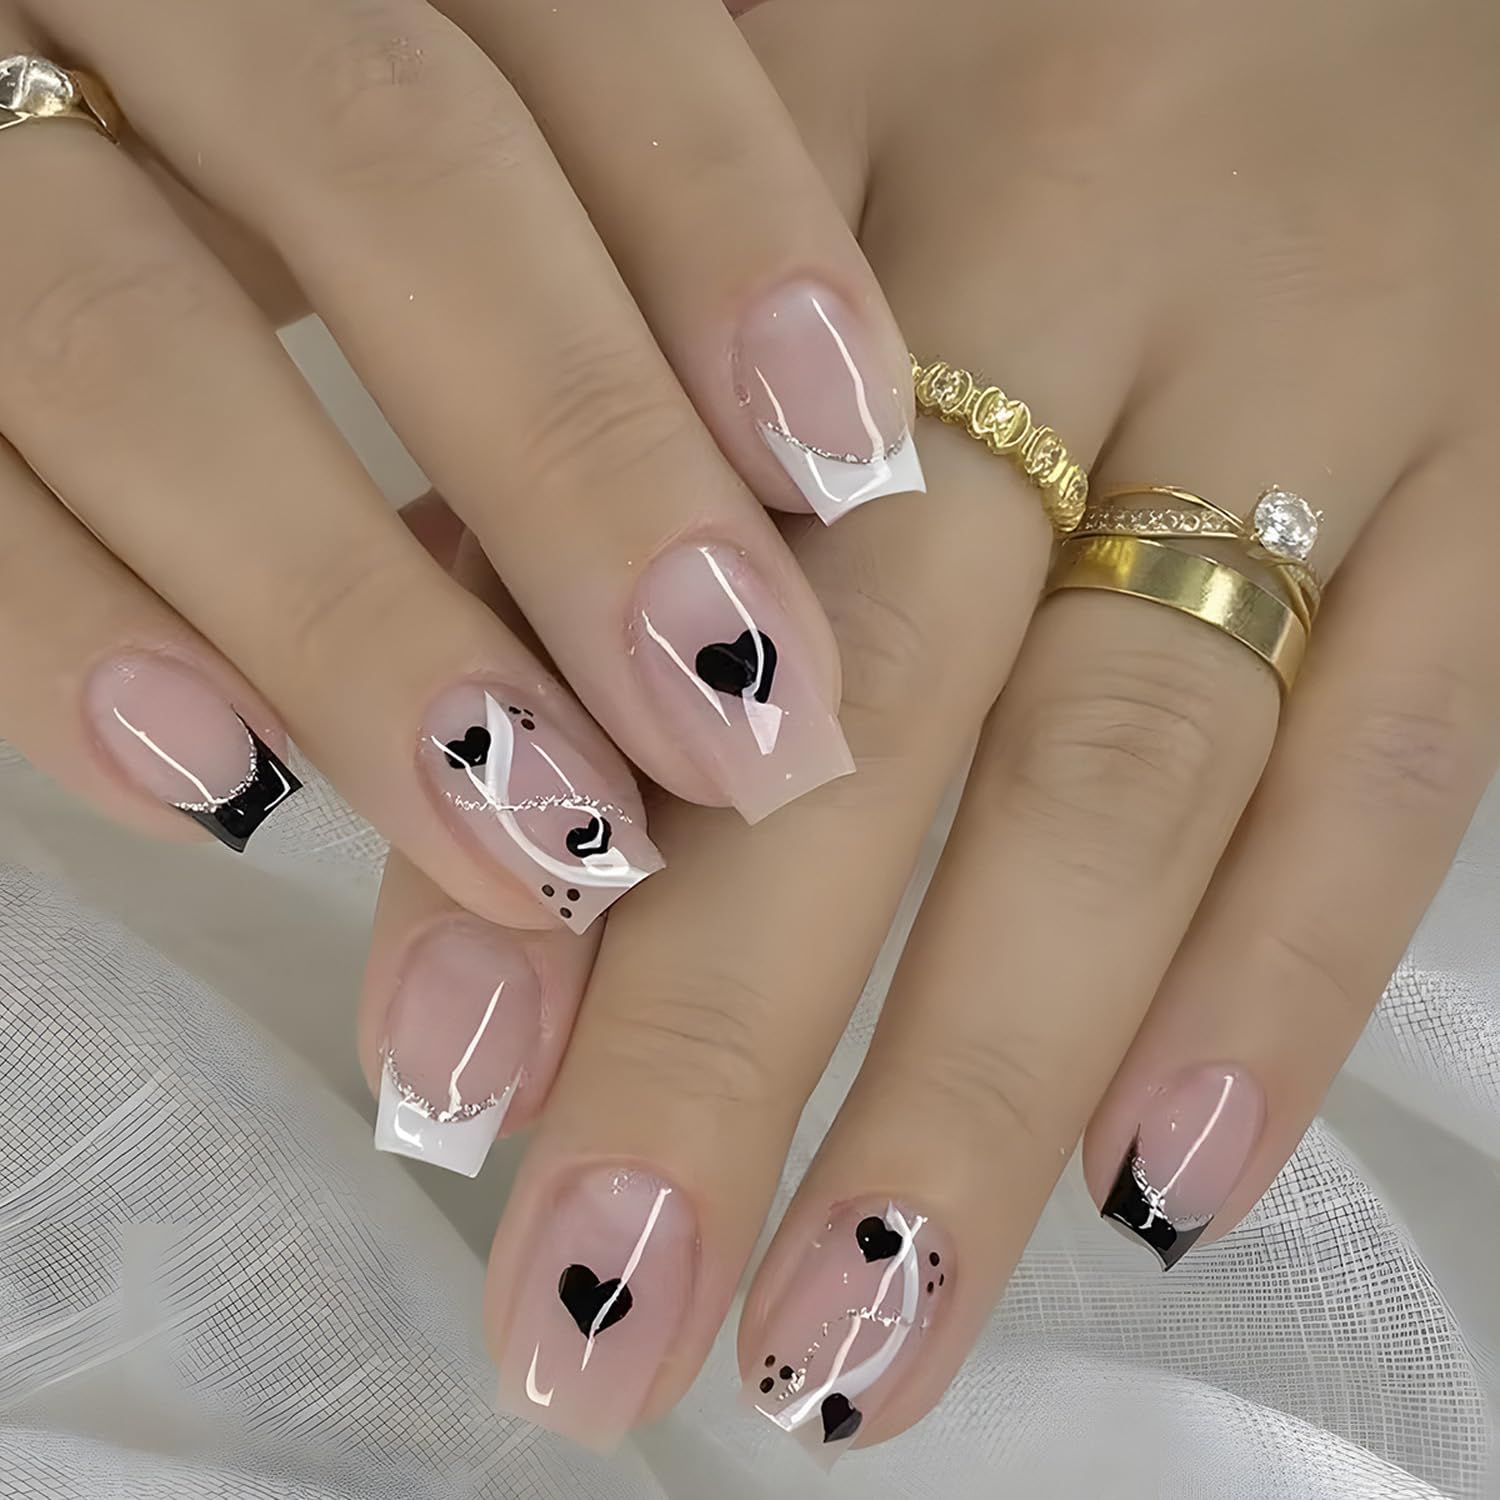 24Pcs Valentine's Day Press on Nails Short Square Fake Nails with Sliver Glitter Black Heart Design Glossy False Nails Cute Valentine's Day Nails Acrylic Nails Full Cover Glue on Nails for Women Christmas1-F